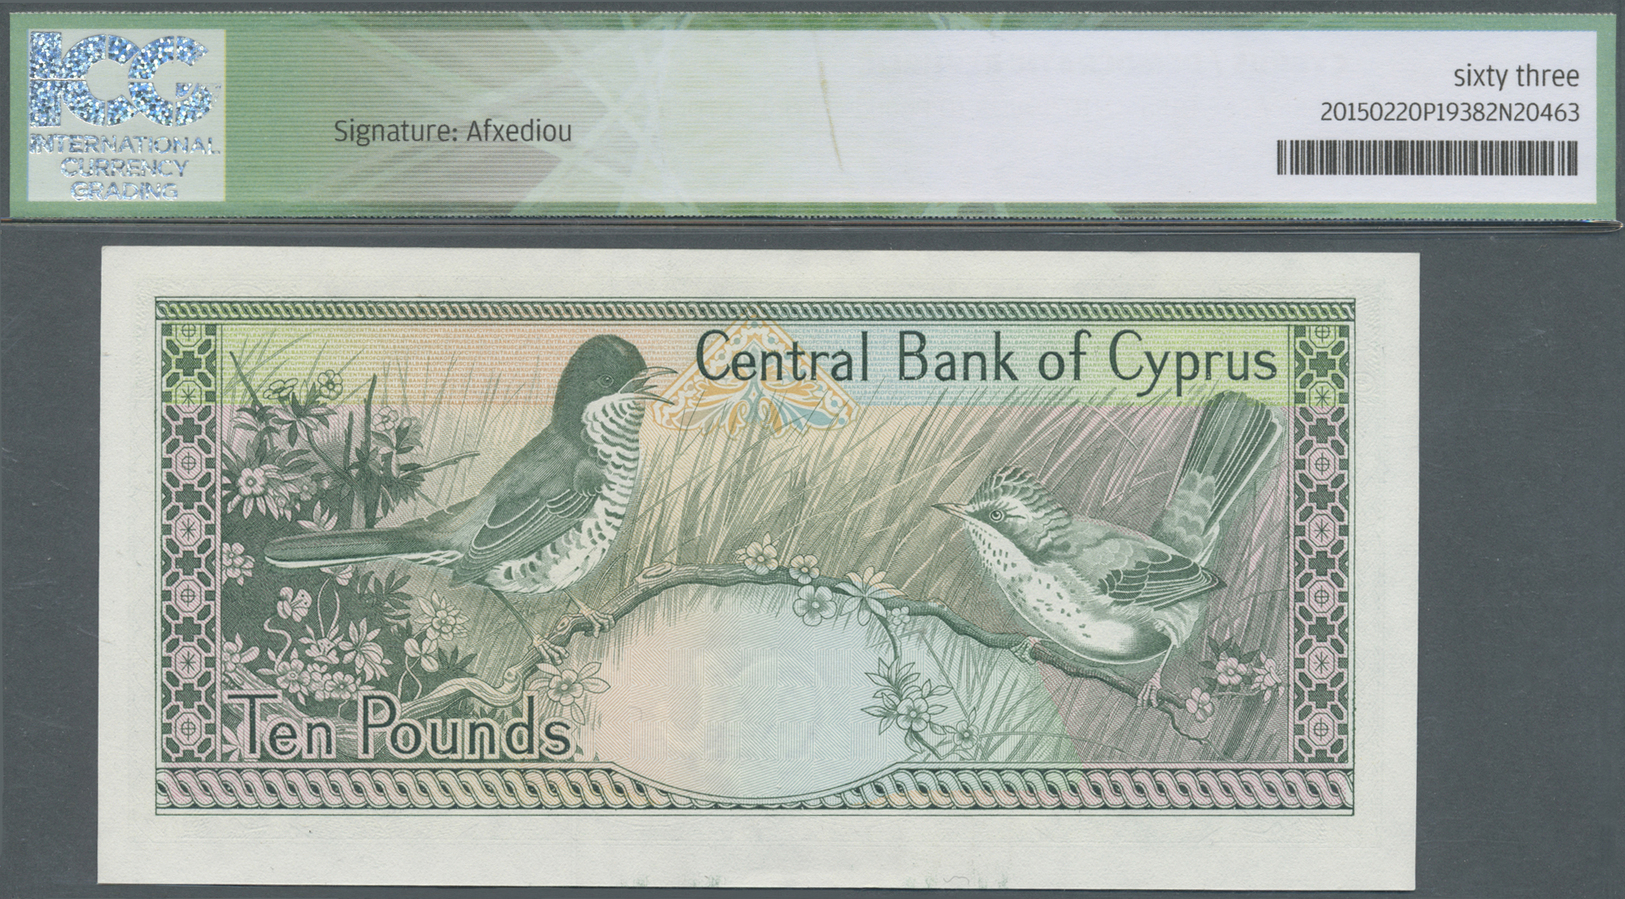 00624 Cyprus / Zypern: 10 Pounds 1990 P. 55a, ICG Graded 63 UNC. - Cyprus